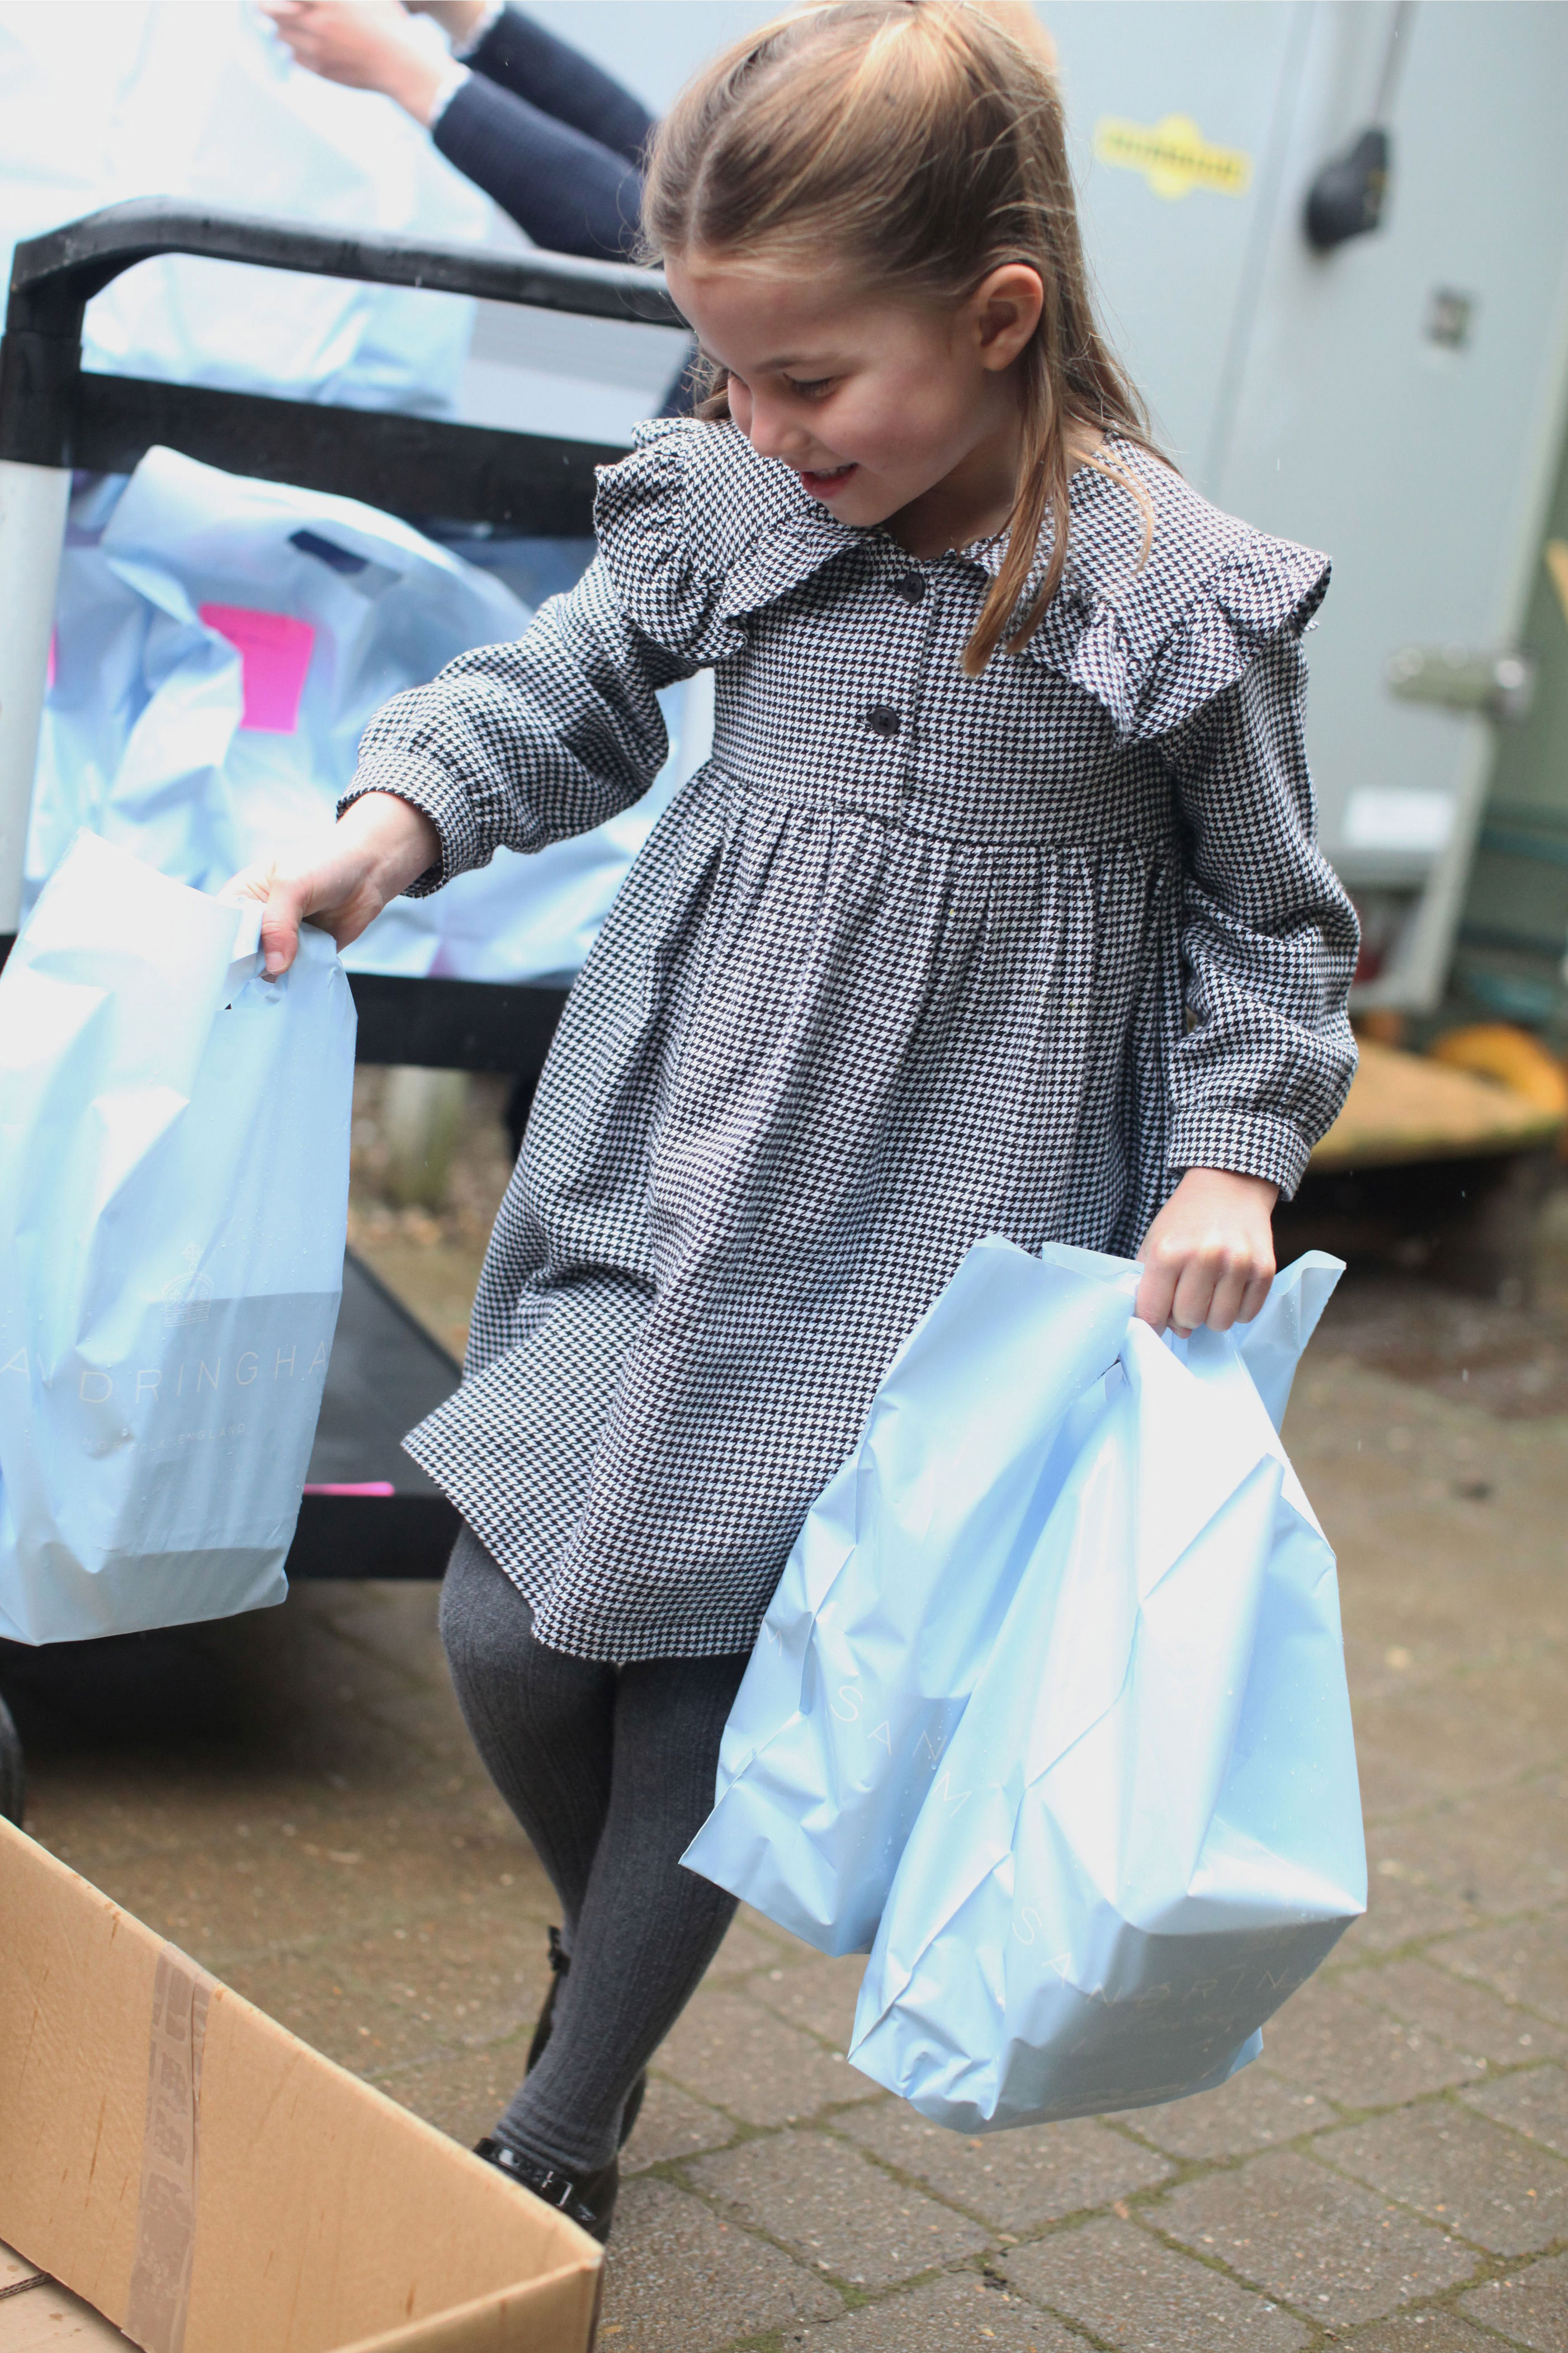 <p>Kensington Palace released this photo of Princess Charlotte to mark her 5th birthday. It was taken in April by her mother, the Duchess of Cambridge, on the queen's Sandringham Estate, where the family helped to pack up and deliver food packages for isolated pensioners in the local area.</p>